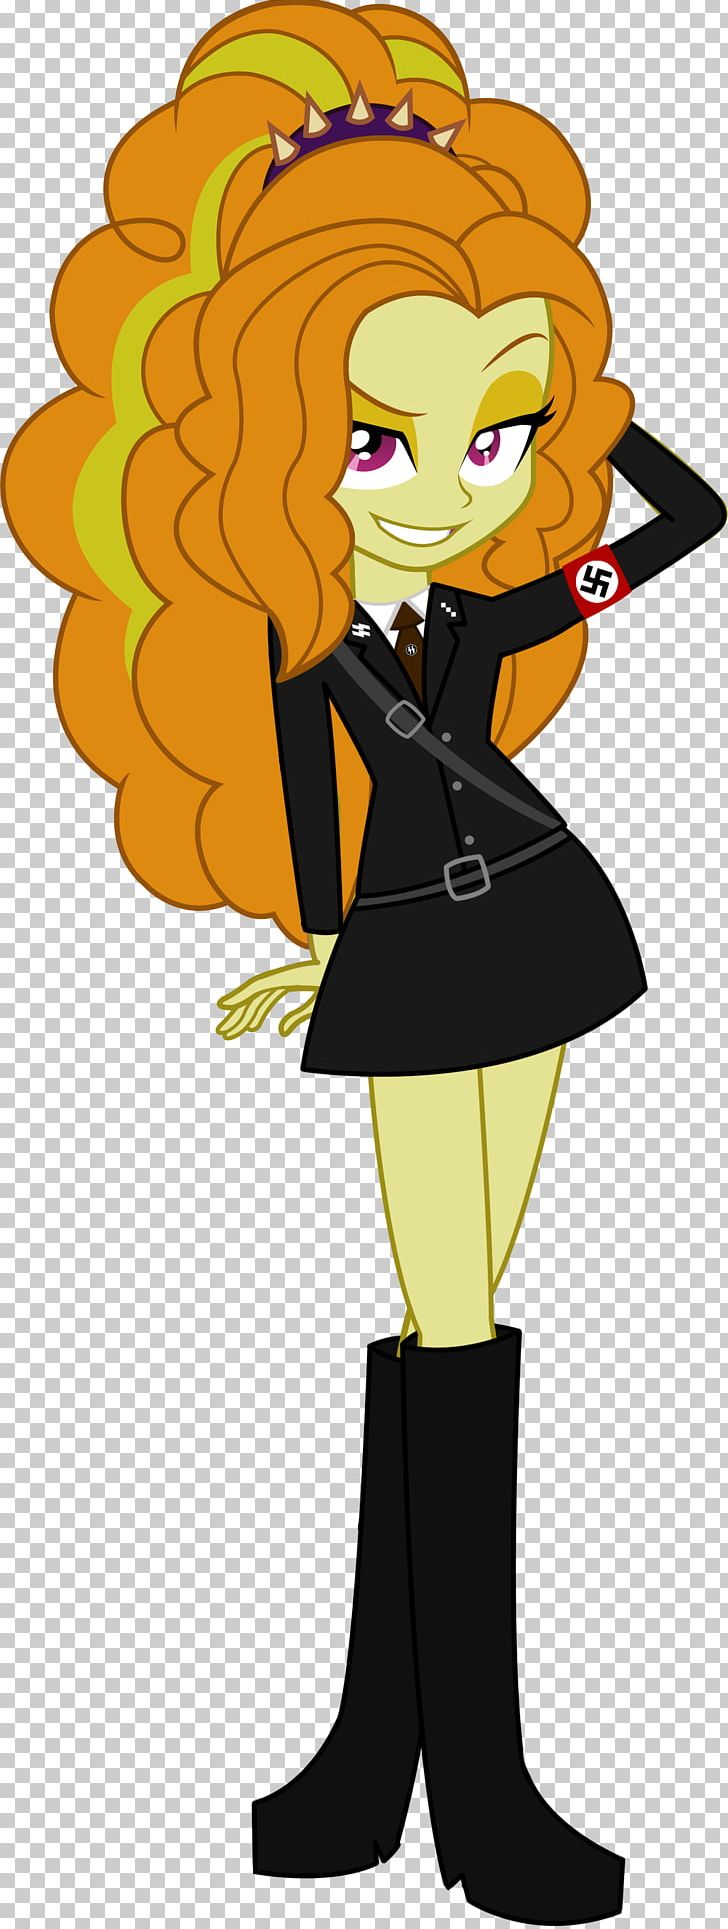 My Little Pony: Equestria Girls Adagio Dazzle PNG, Clipart, Cartoon, Deviantart, Equestria, Fictional Character, Girl Free PNG Download